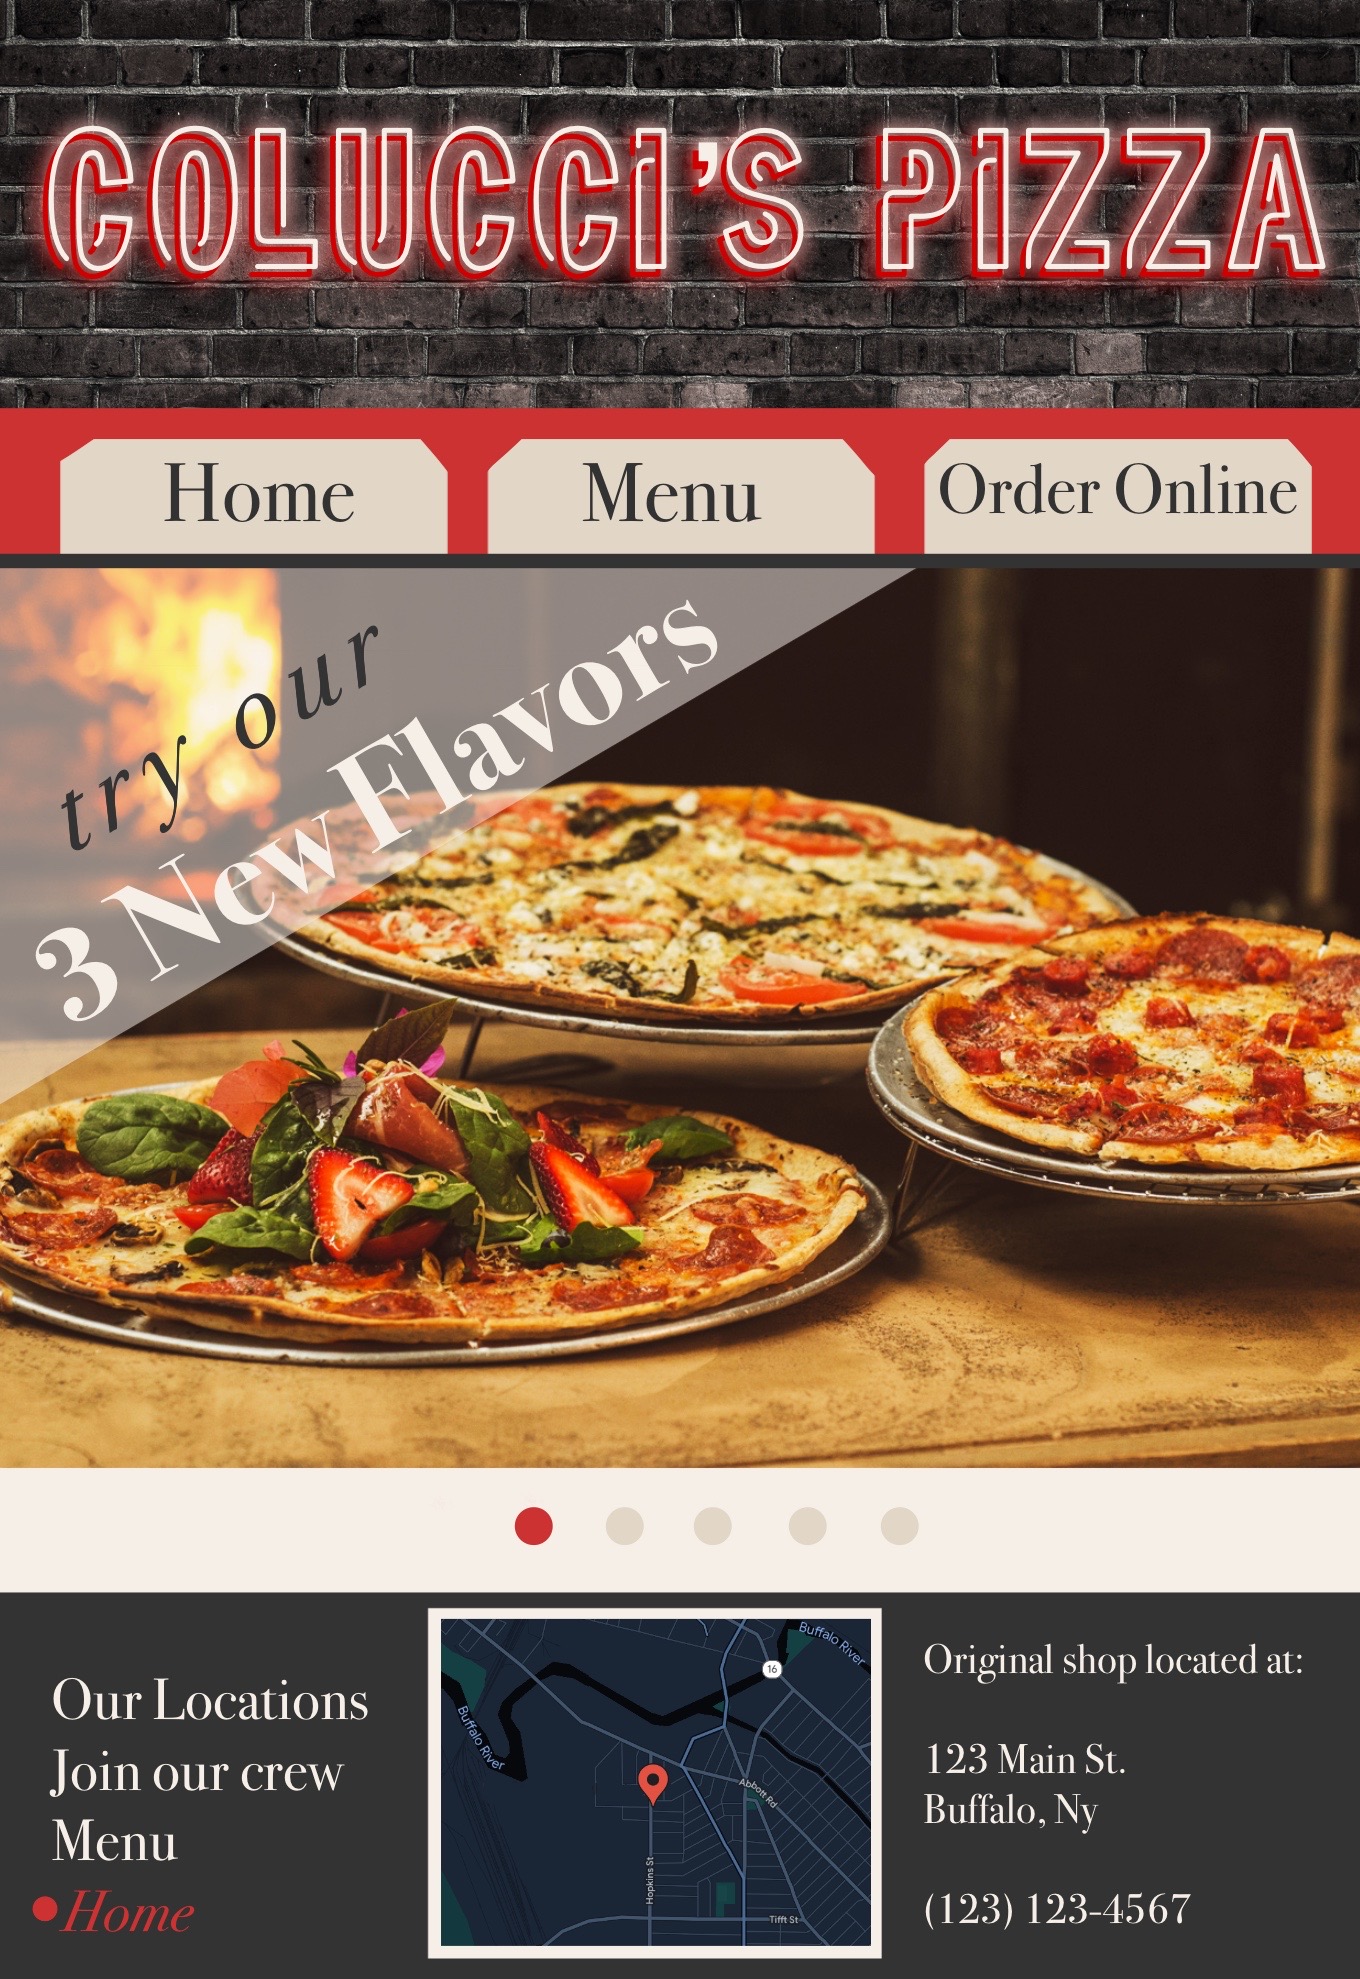 design sample for a pizza shop website. depicting neon lettering against a brick background and a photo of pizza.